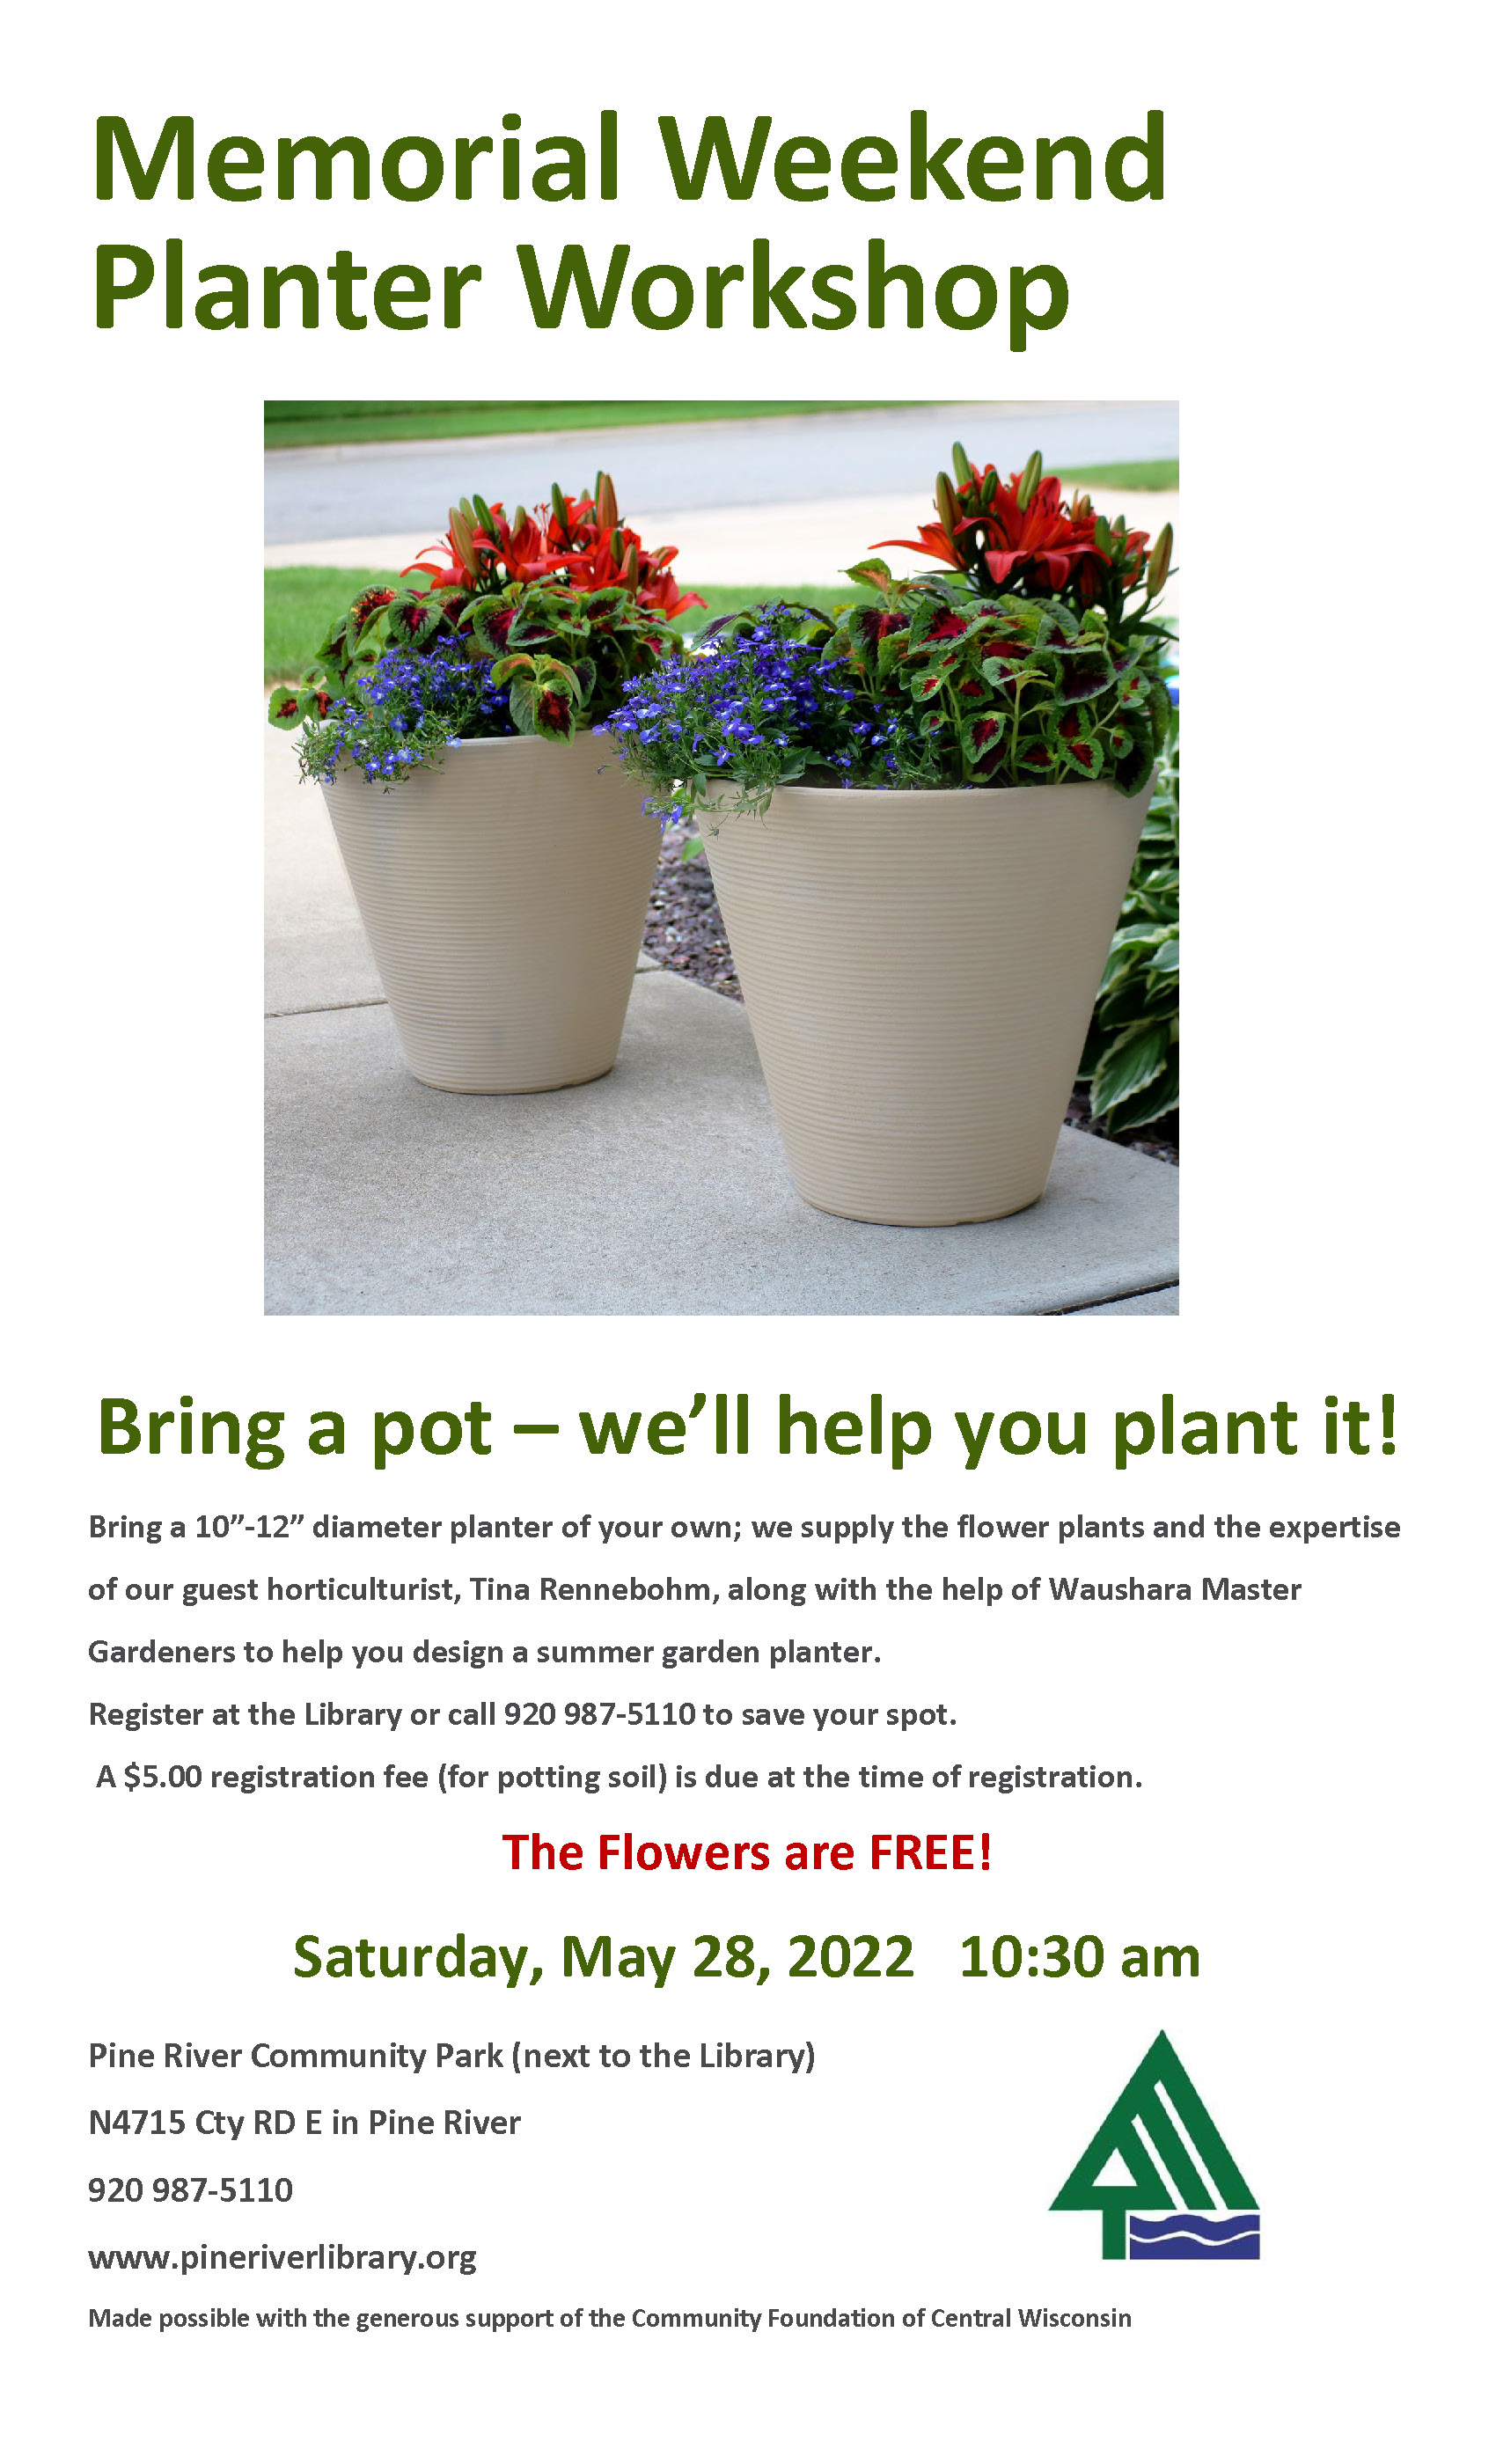 Planter Workshop Registration is Closed 5/27/22.  Class is Full.